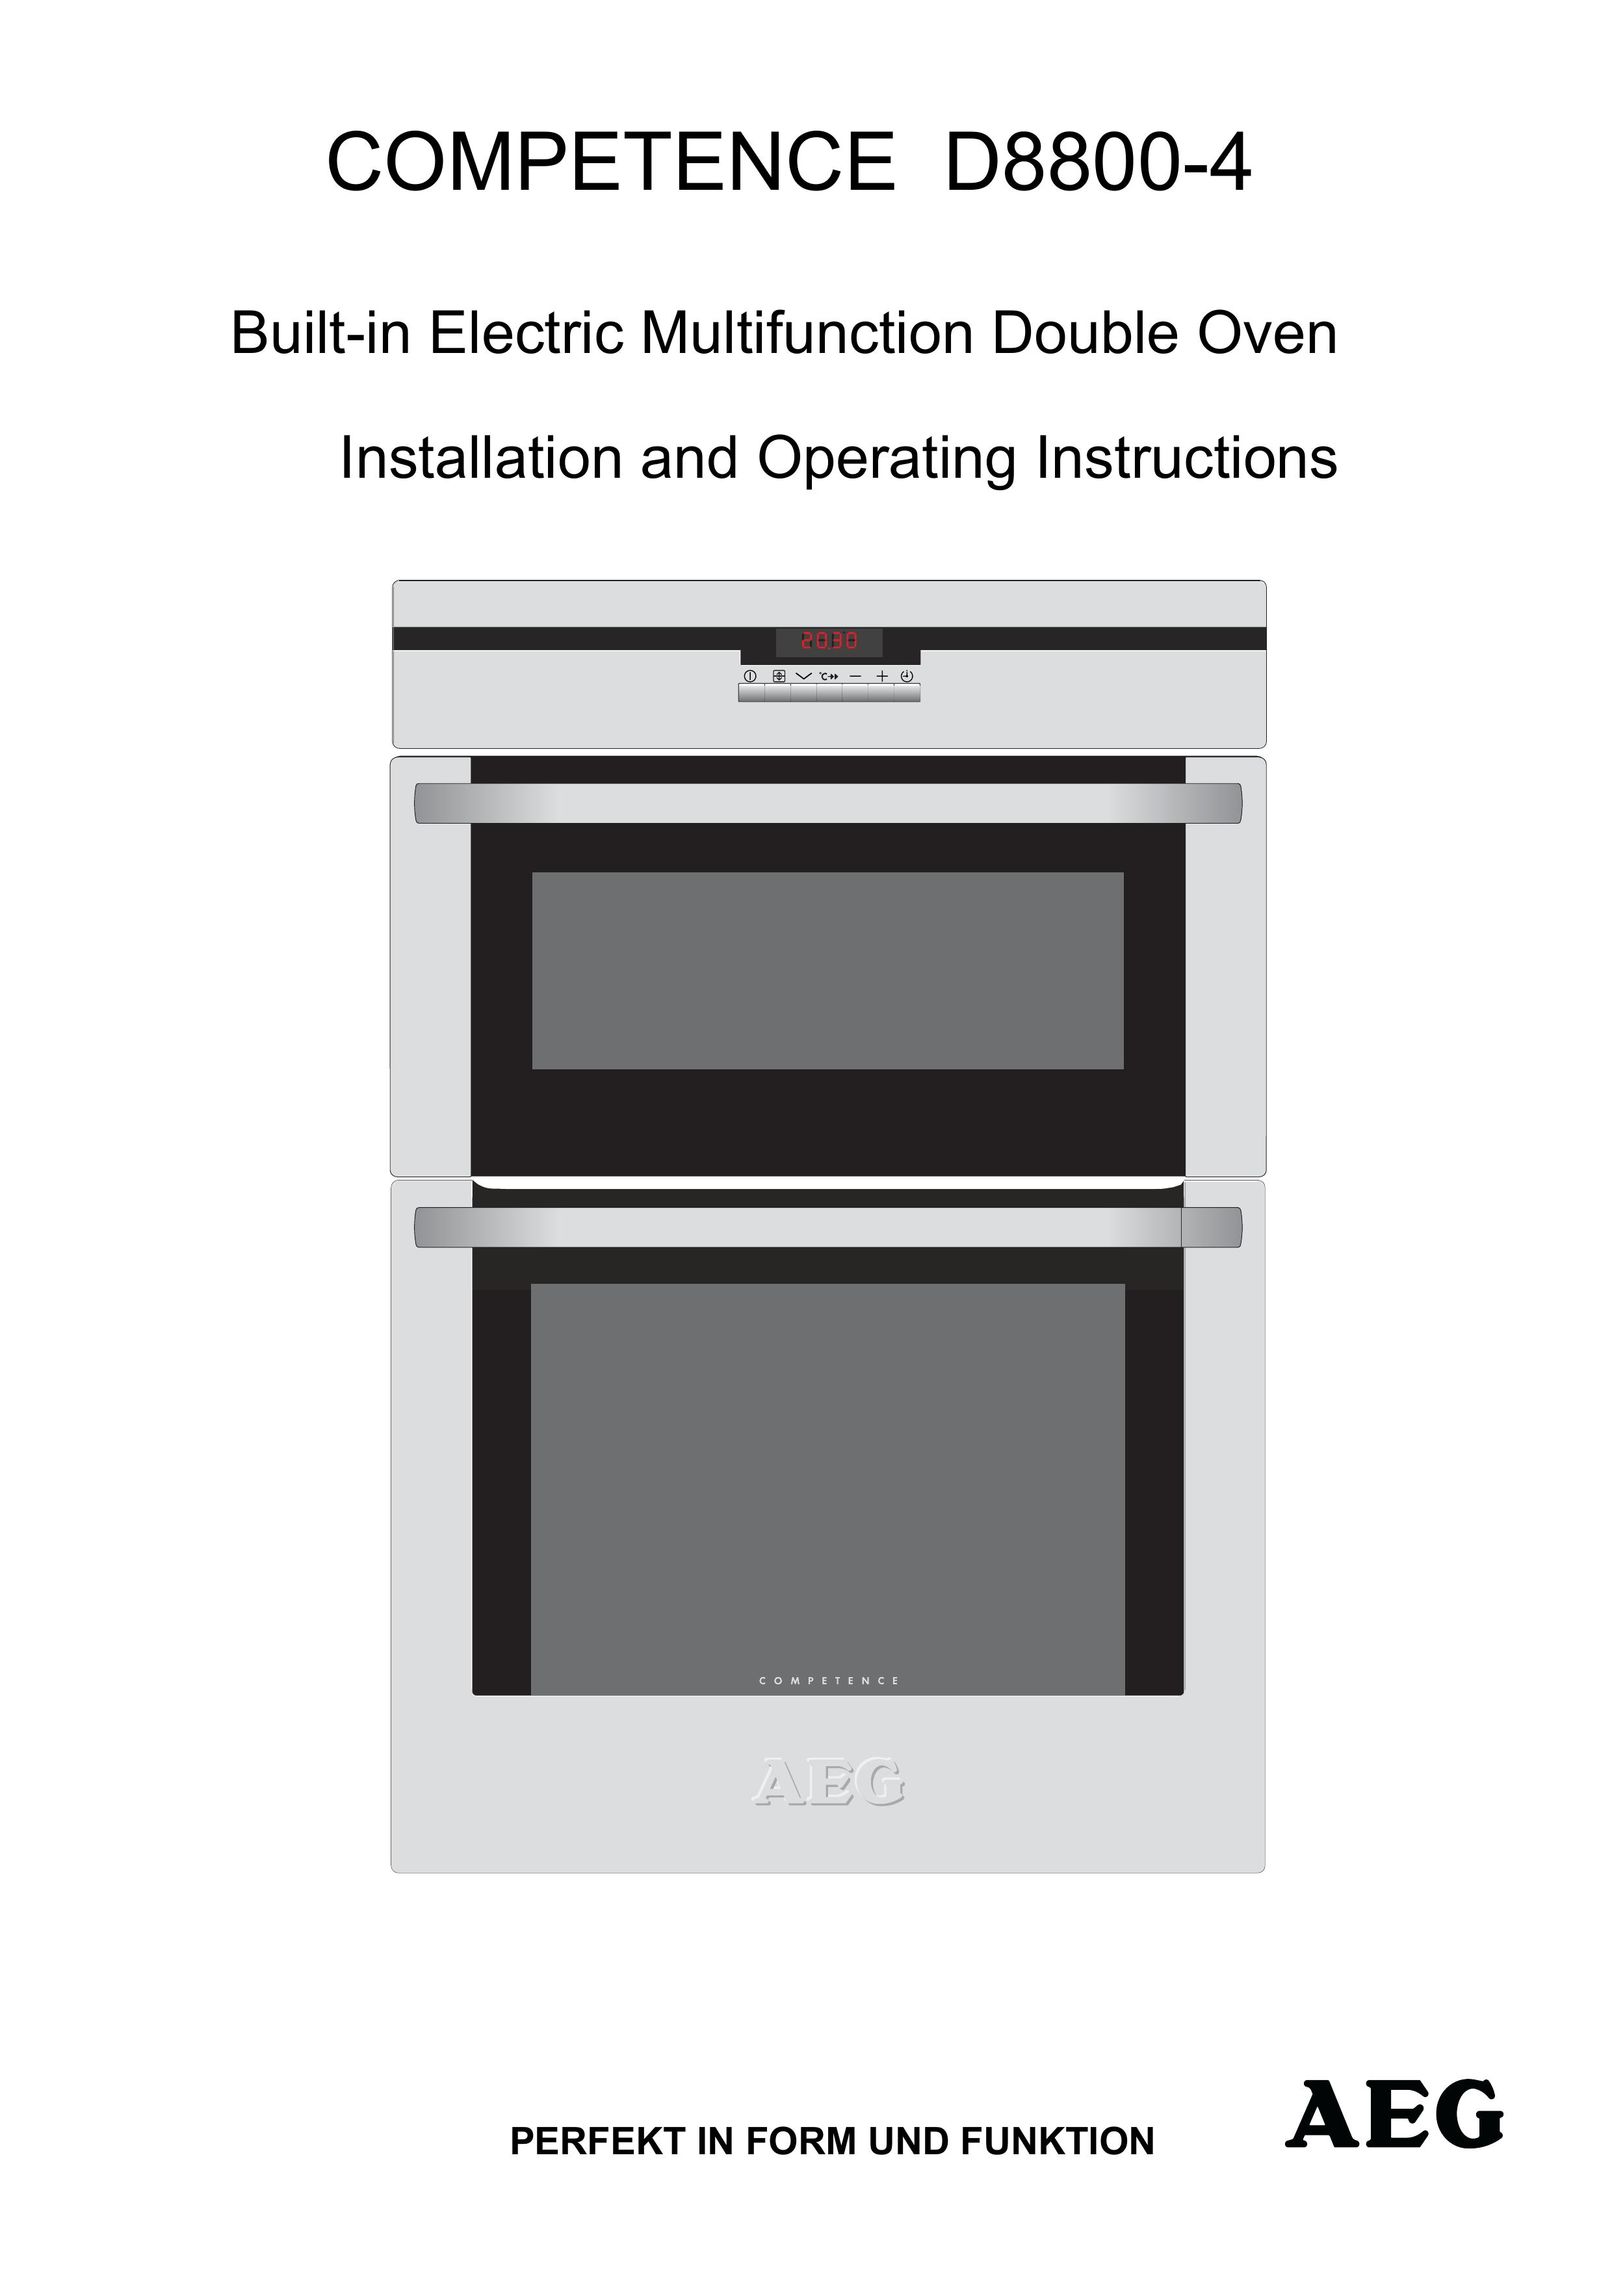 AEG D8800-4 Double Oven User Manual